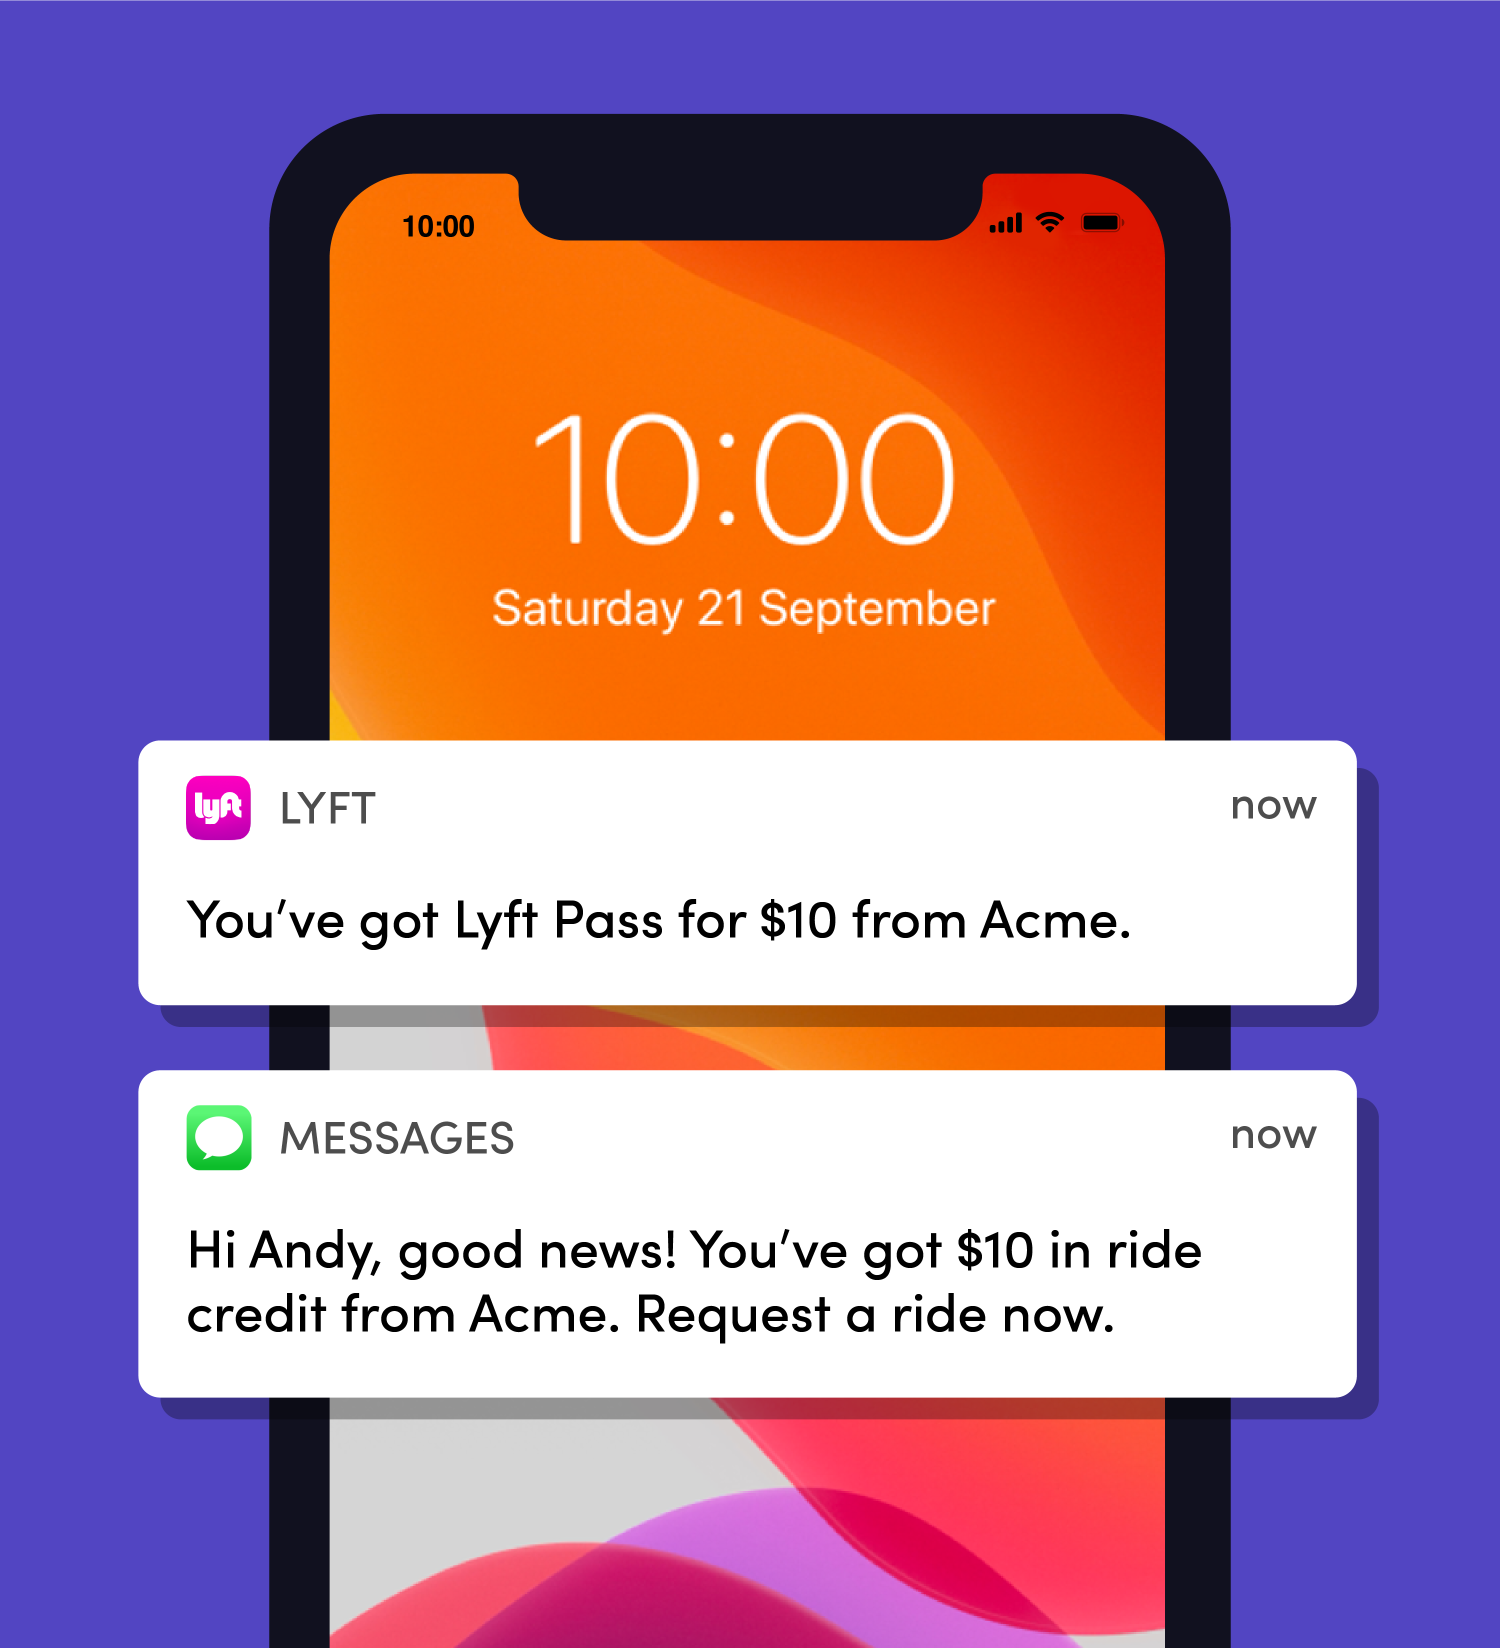 Lyft Pass Your rides, covered